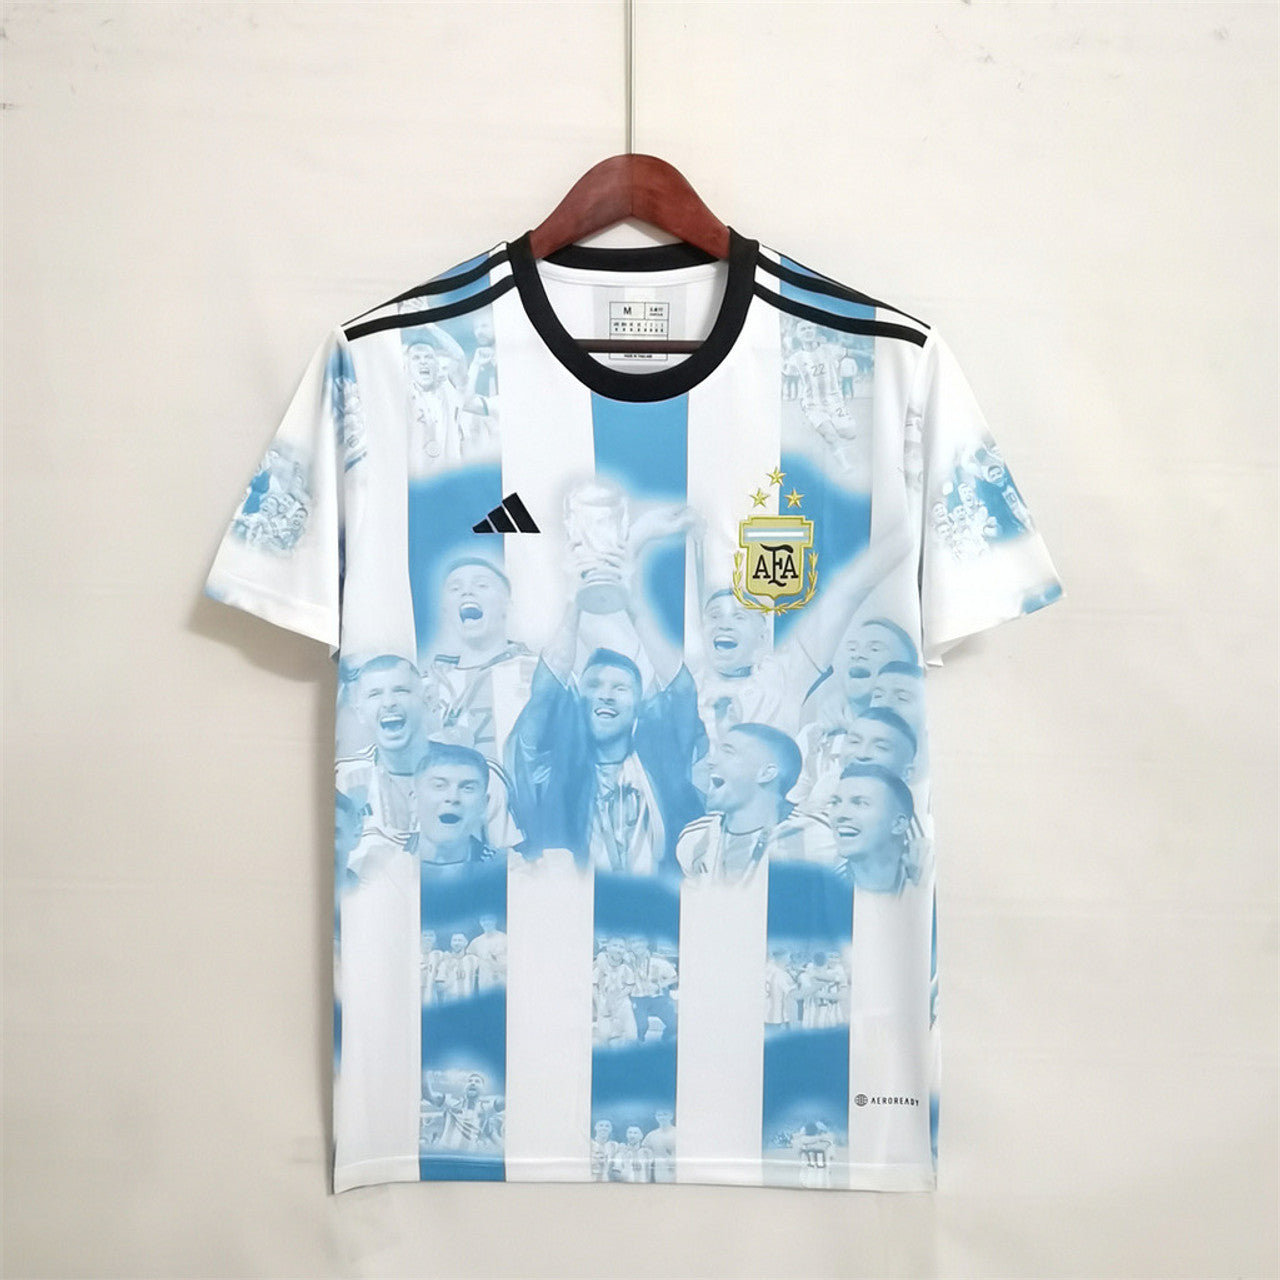 argentina world cup champions jersey